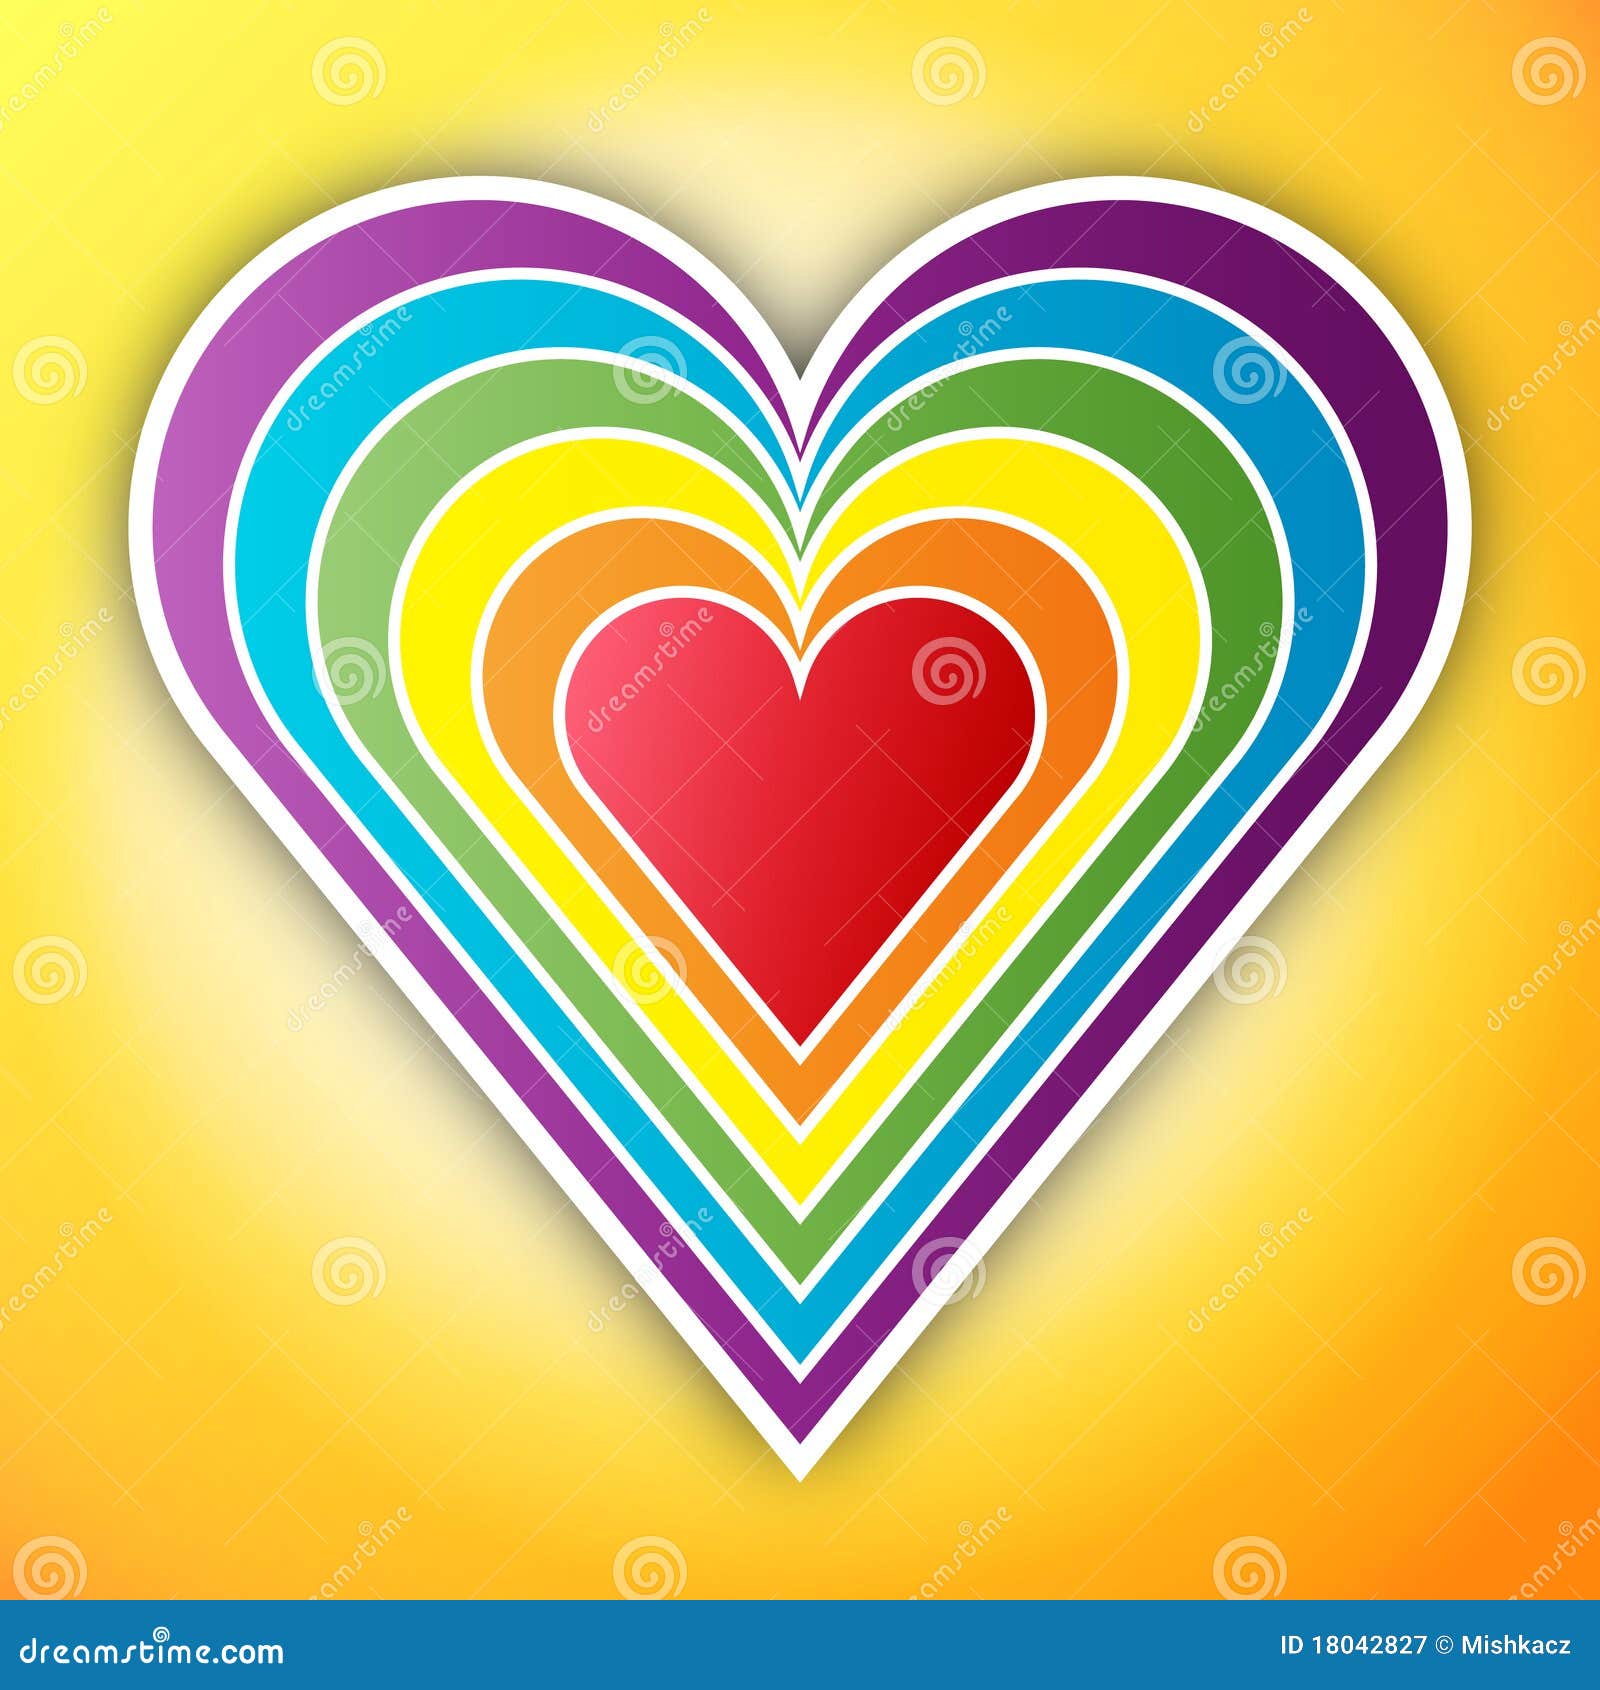 Rainbow heart stock vector. Image of colorful, greetings - 18042827